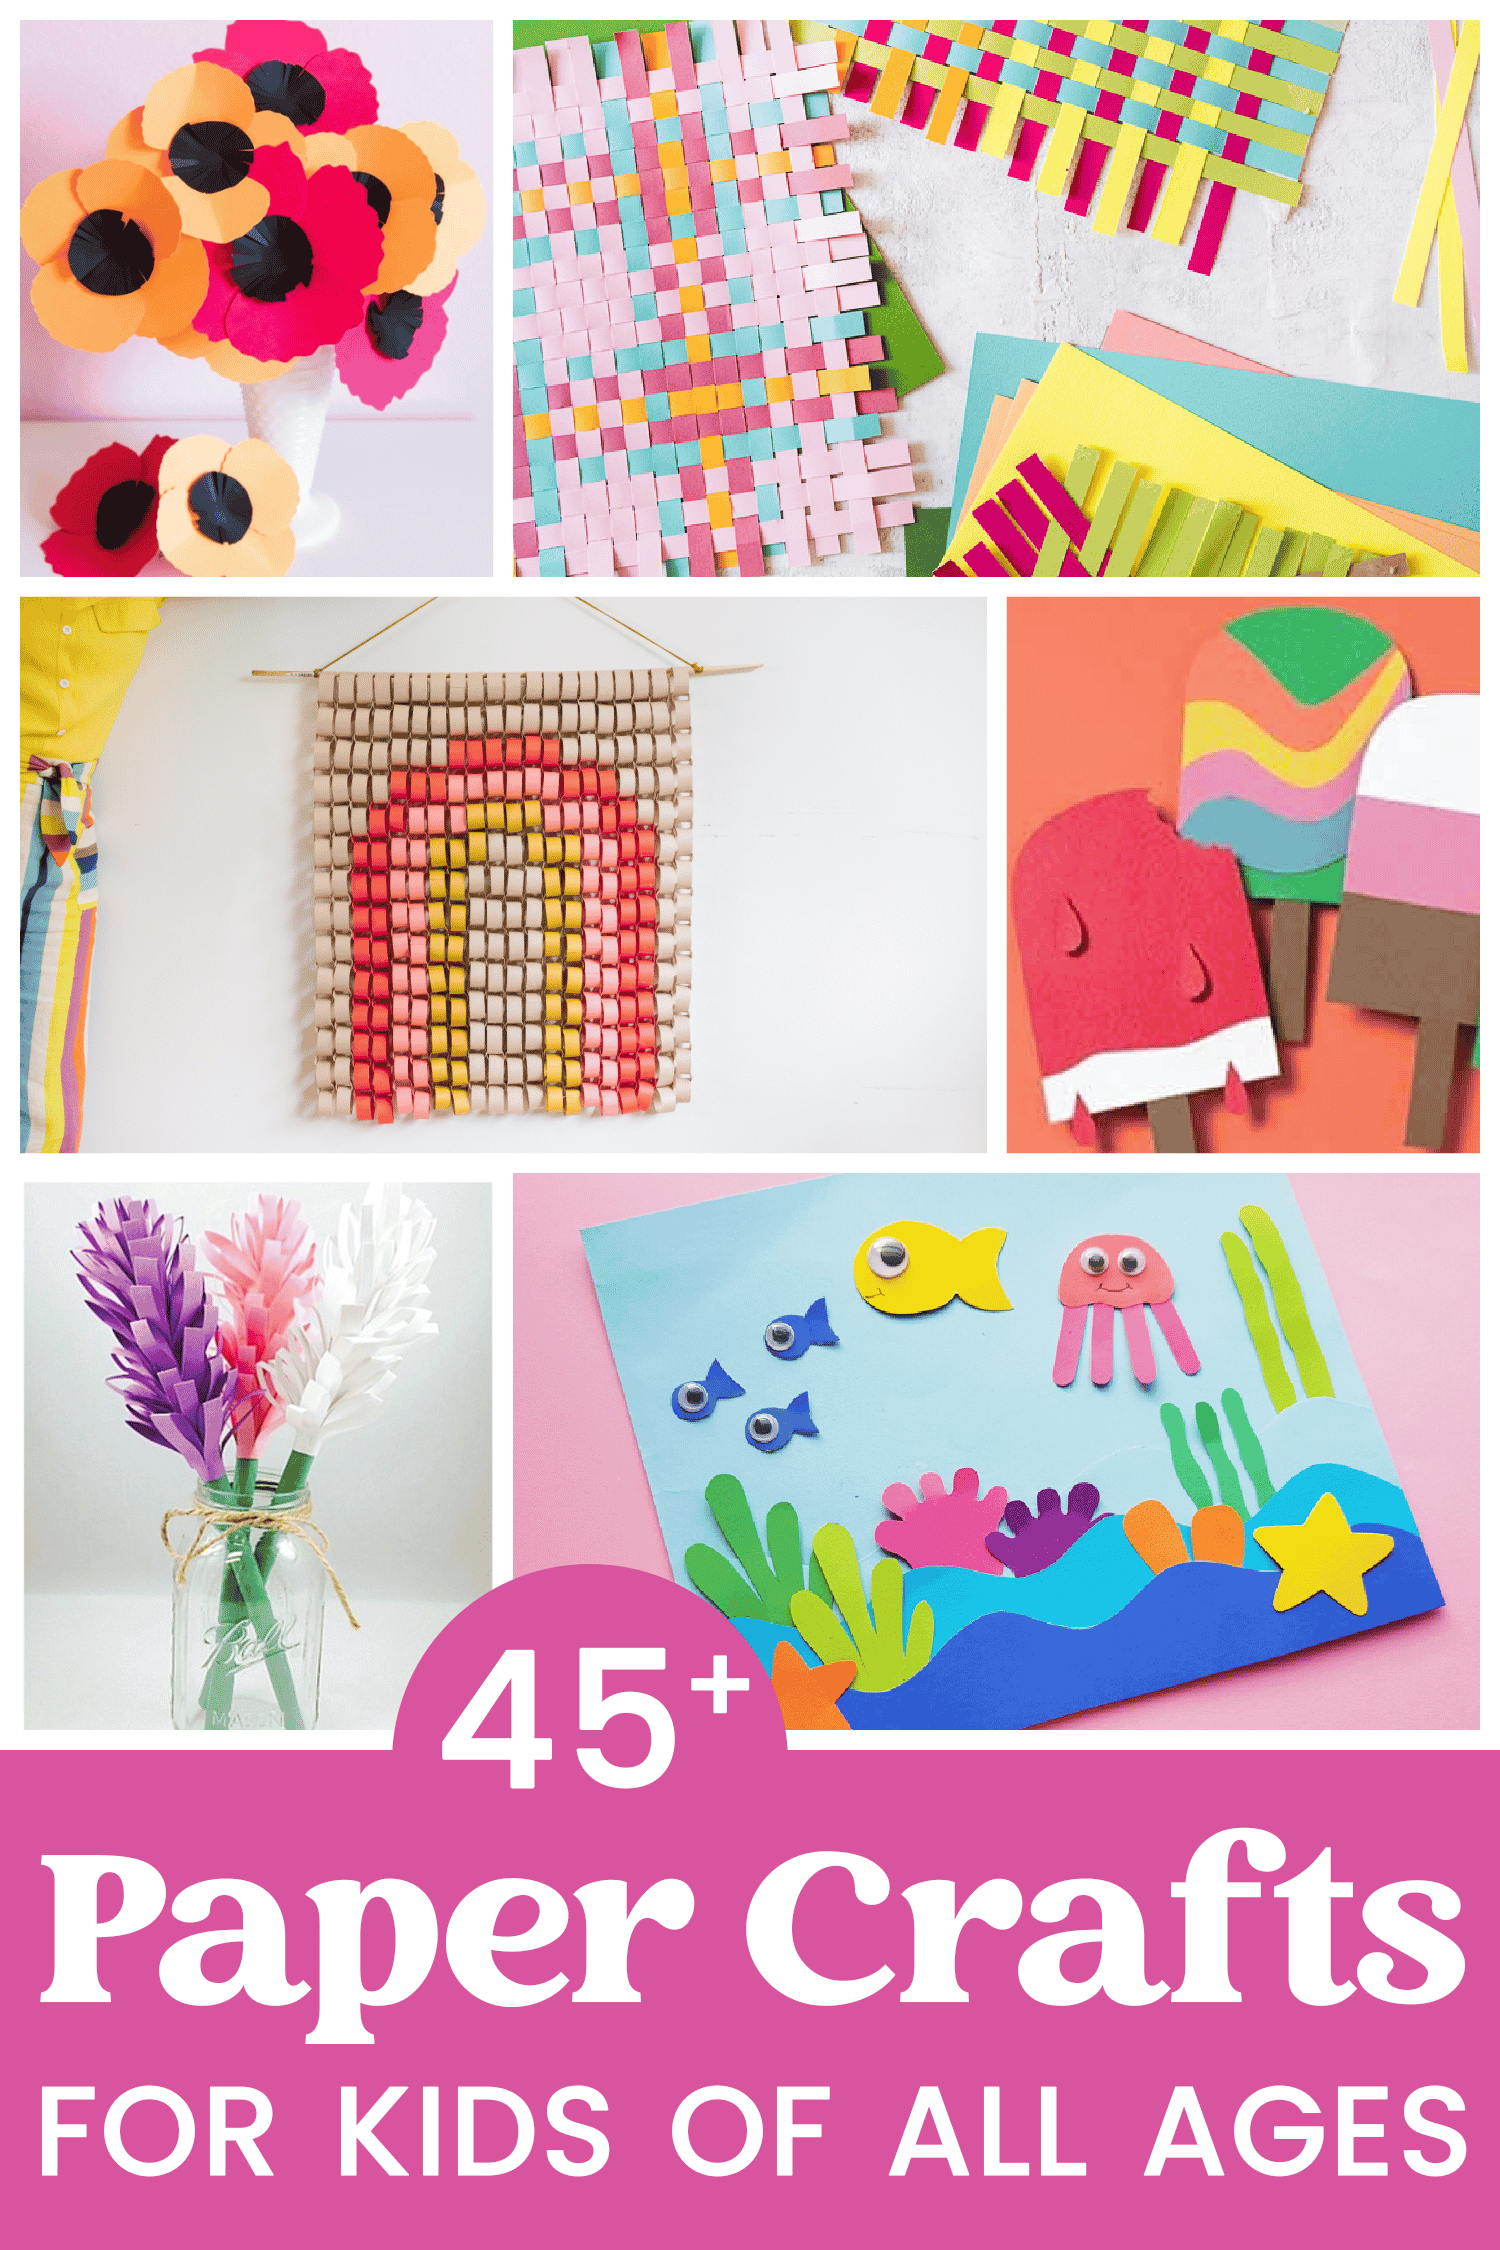 Favorite School and Art Supplies for Bilingual Kids